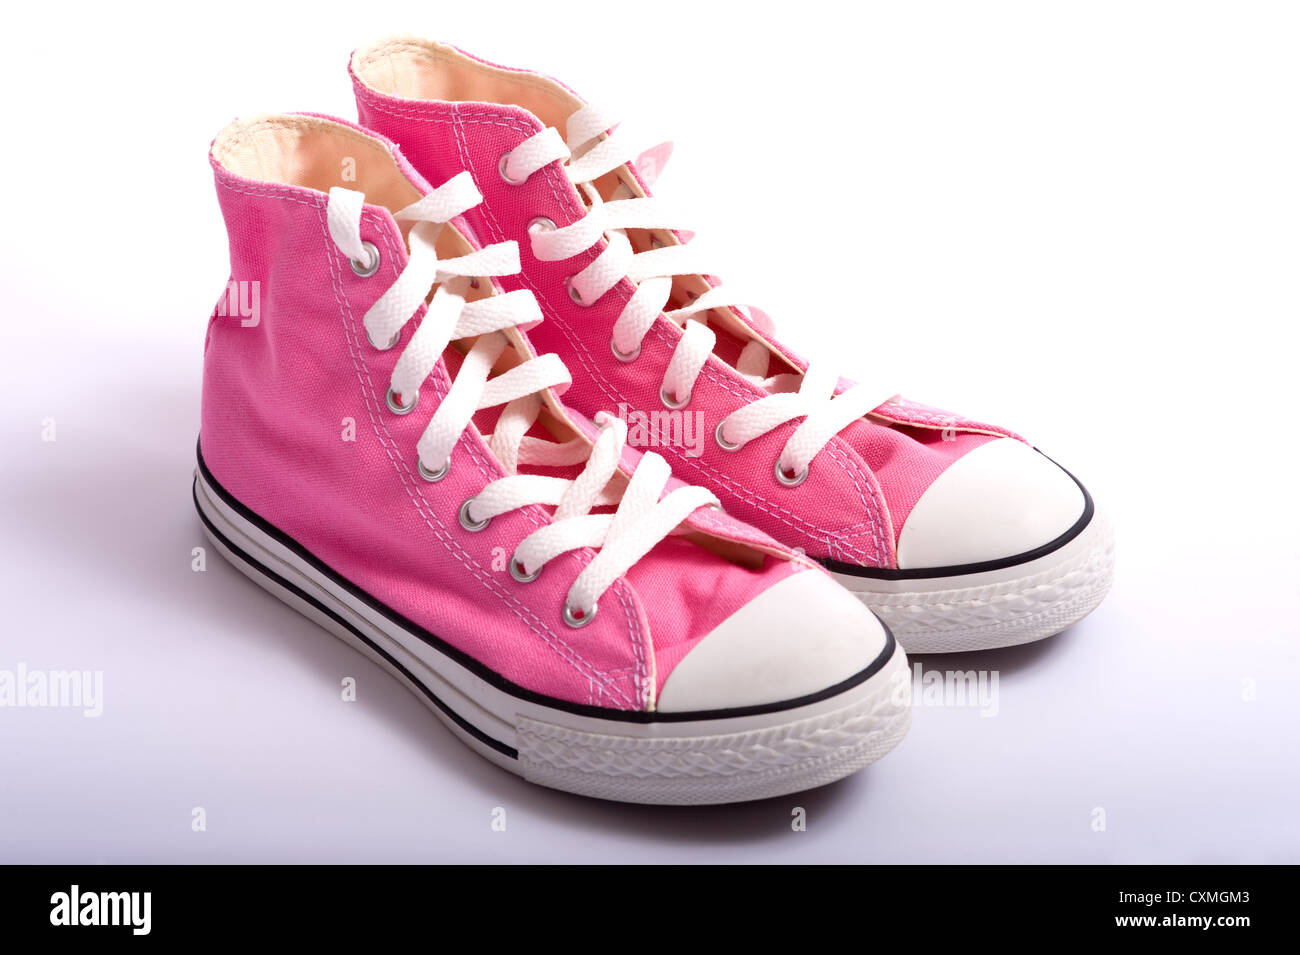 A pair of pink vintage styled canvas basketball shoes or sneakers on a ...